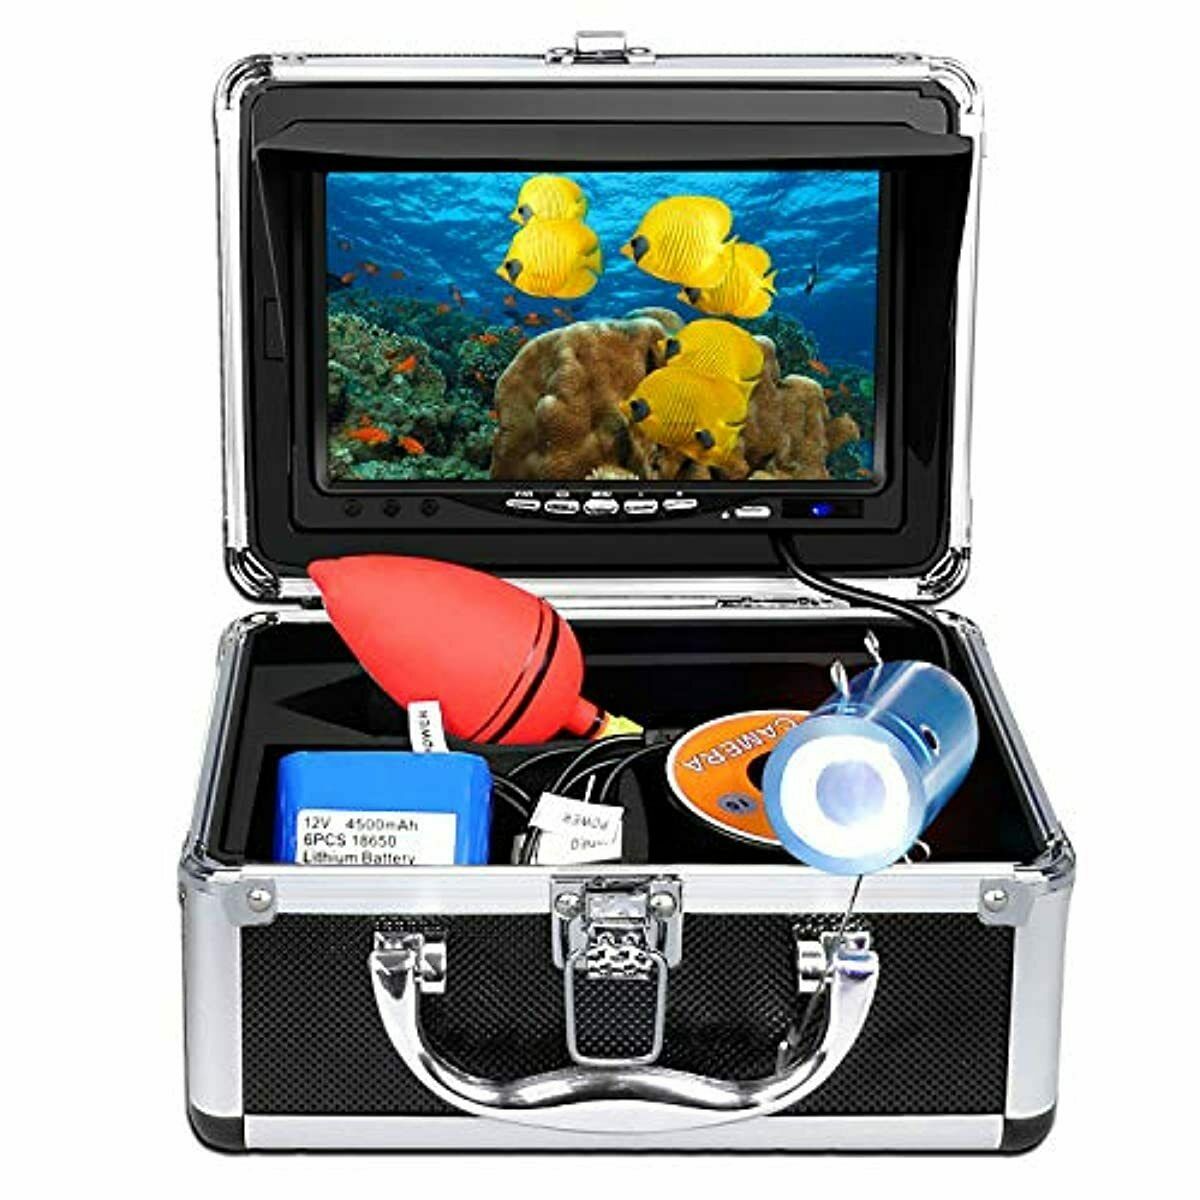 Professional Underwater Fishing Camera With 7" Monitor, 15m Cable W/ Carry Case